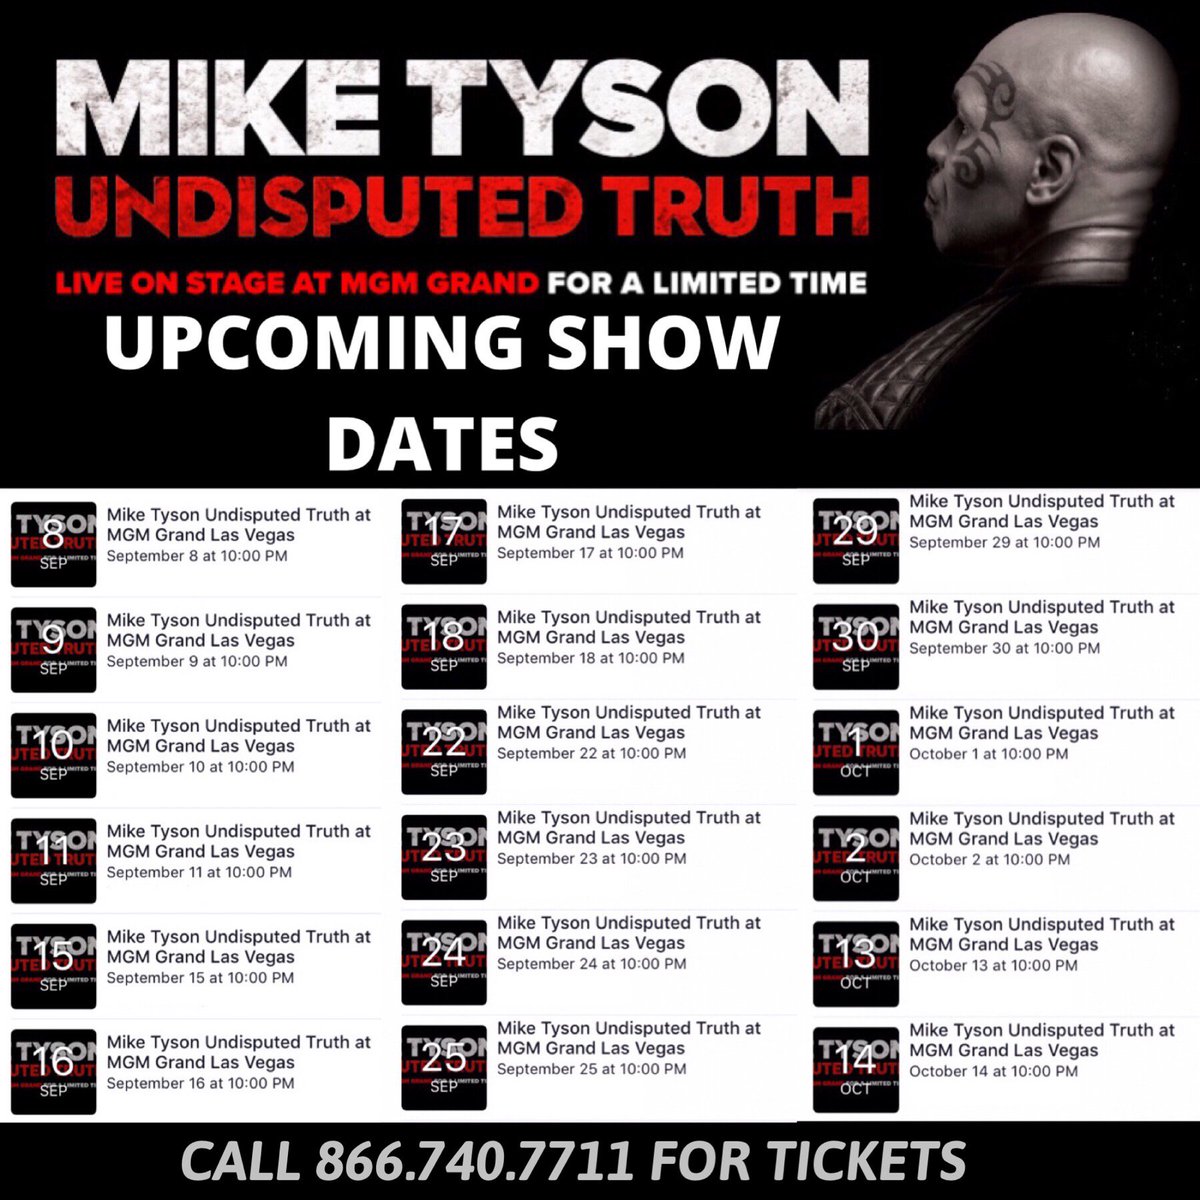 #Subscribe to the #MikeTyson #UndisputedTruth events page on #Facebook to learn new dates. https://t.co/x55qBcyRLf https://t.co/Mgbdh4Ds72